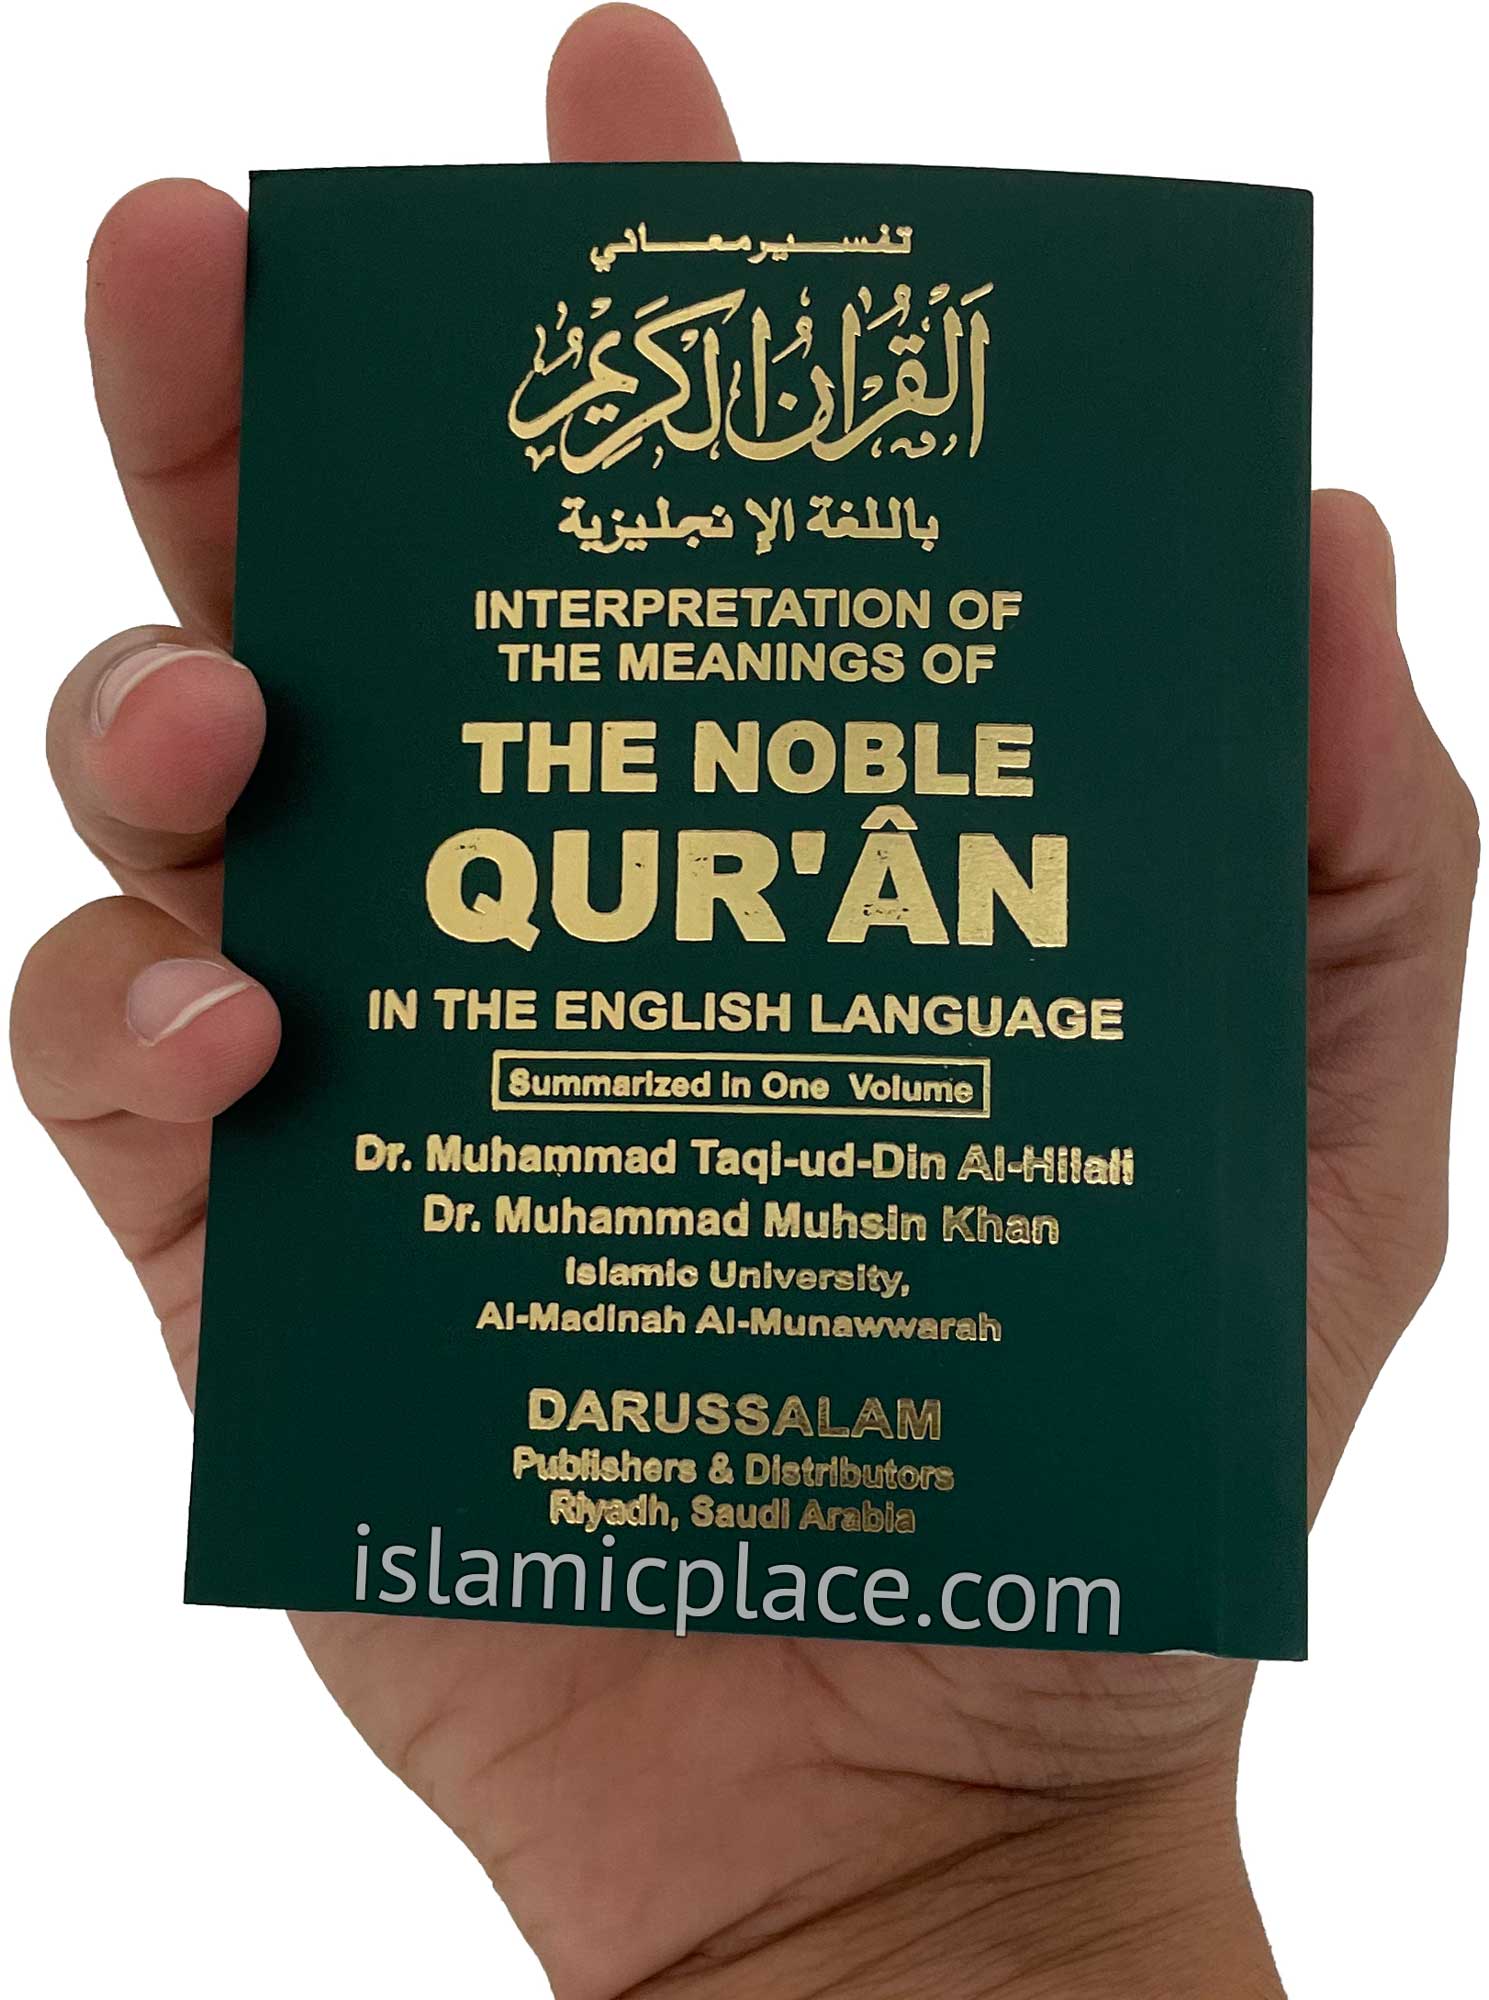 The Noble Quran (paperback in pocket size) Arabic & English